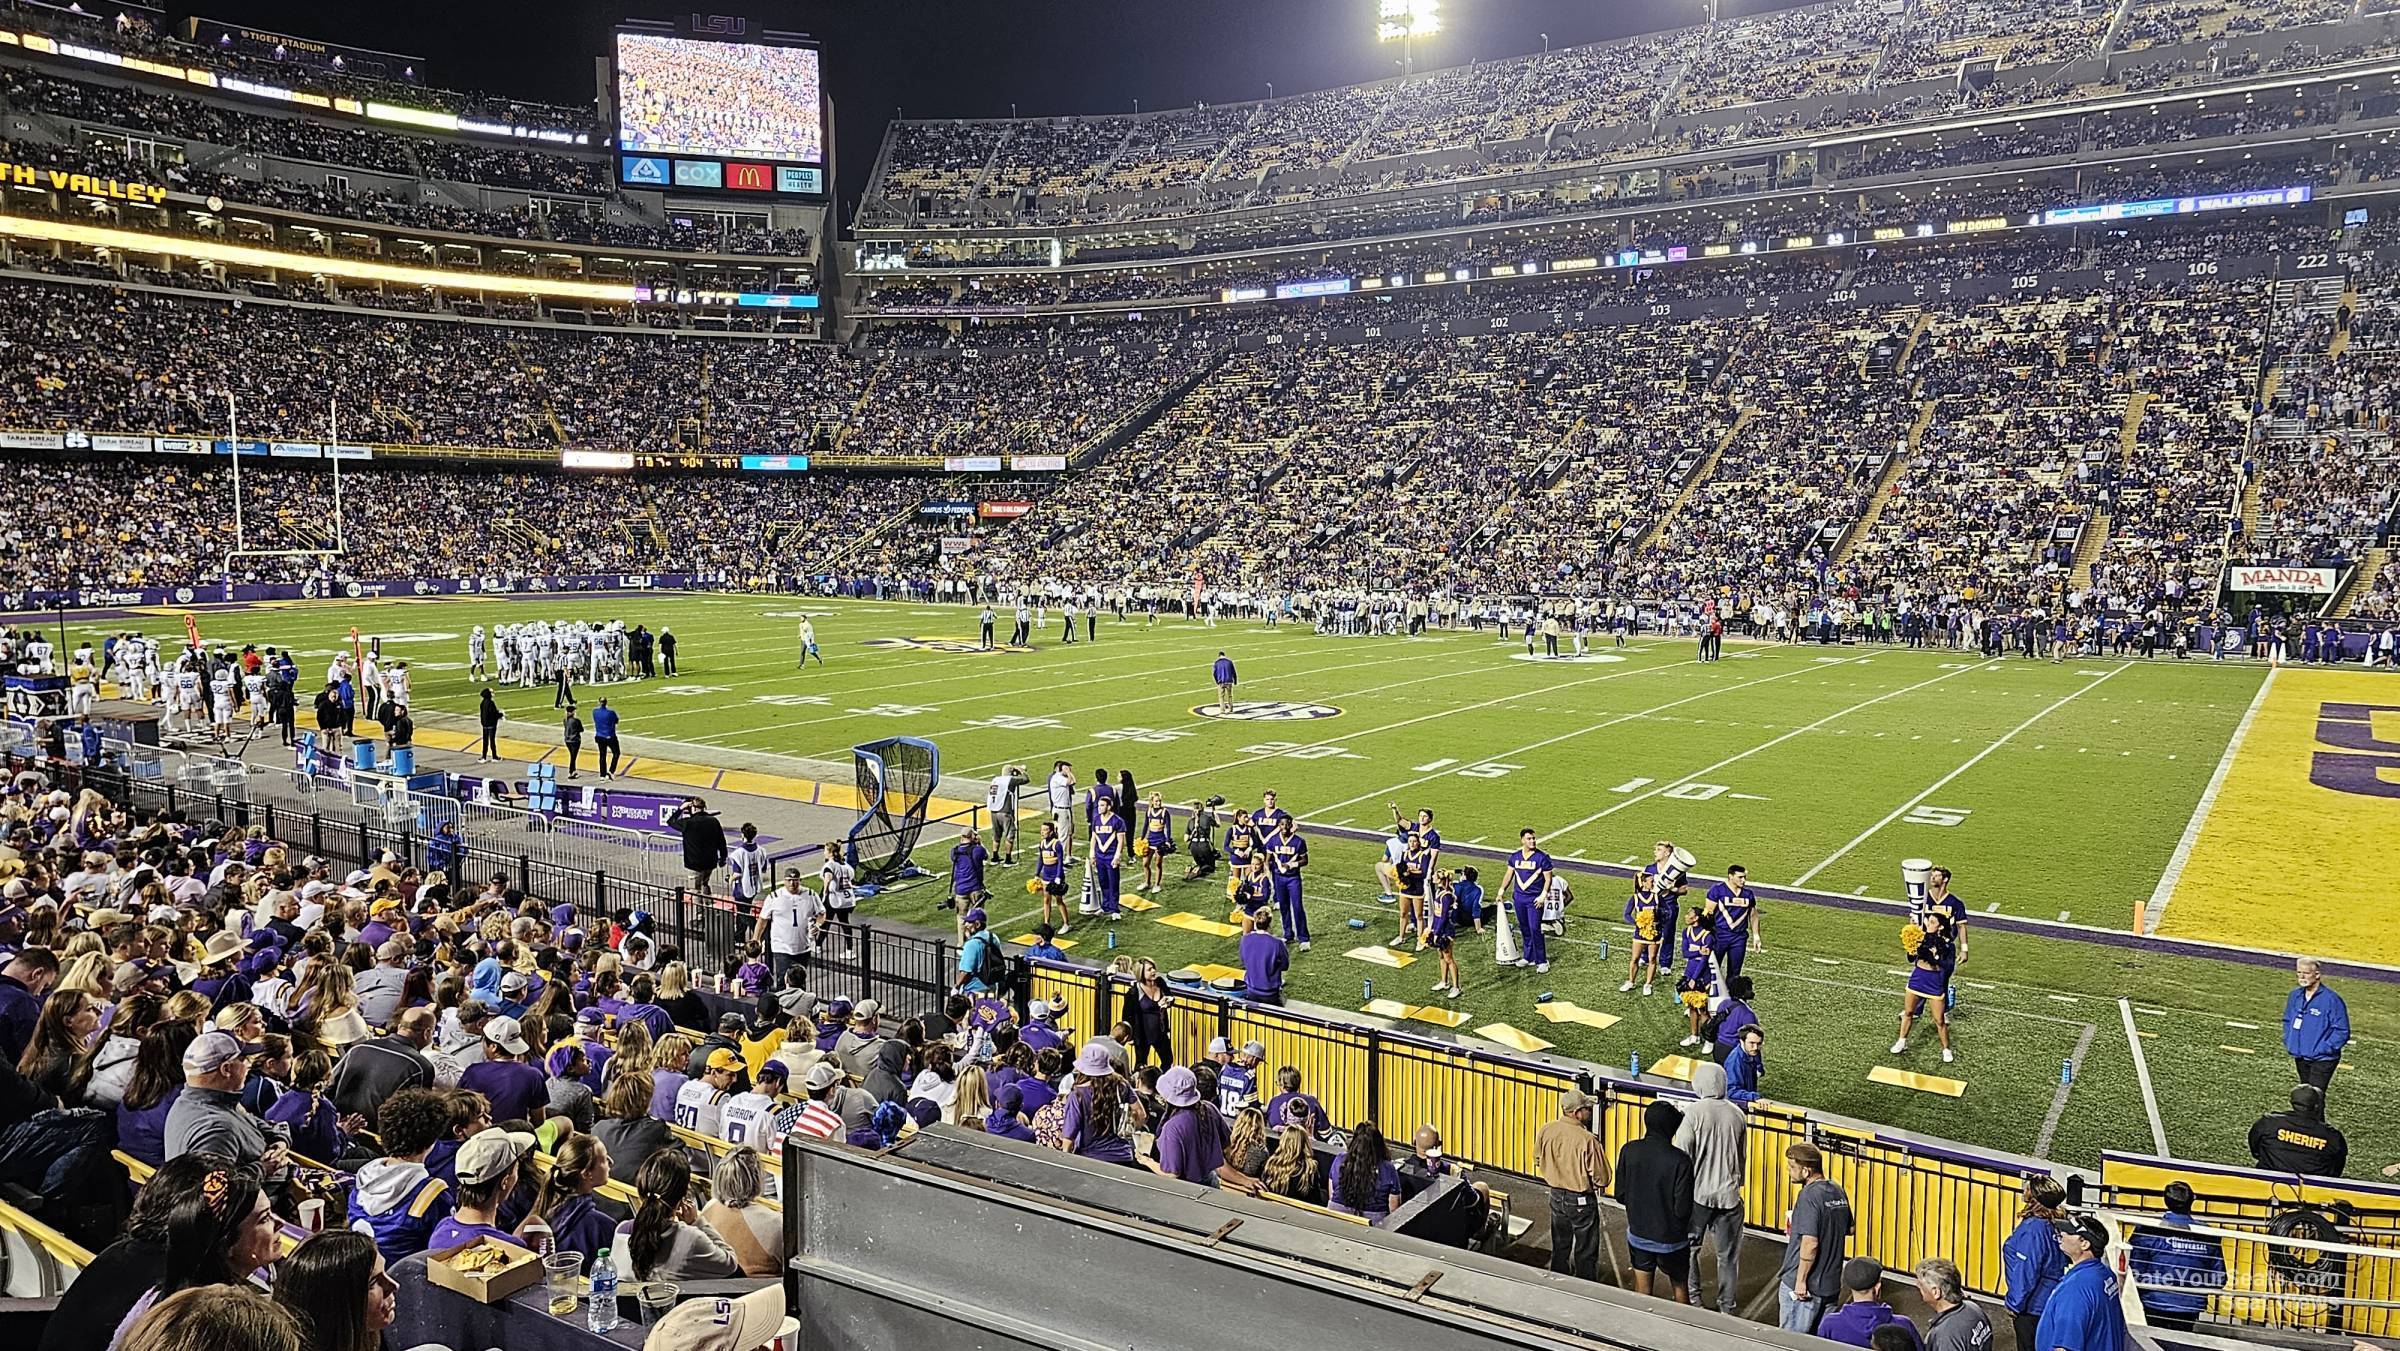 section 210, row 13 seat view  - tiger stadium